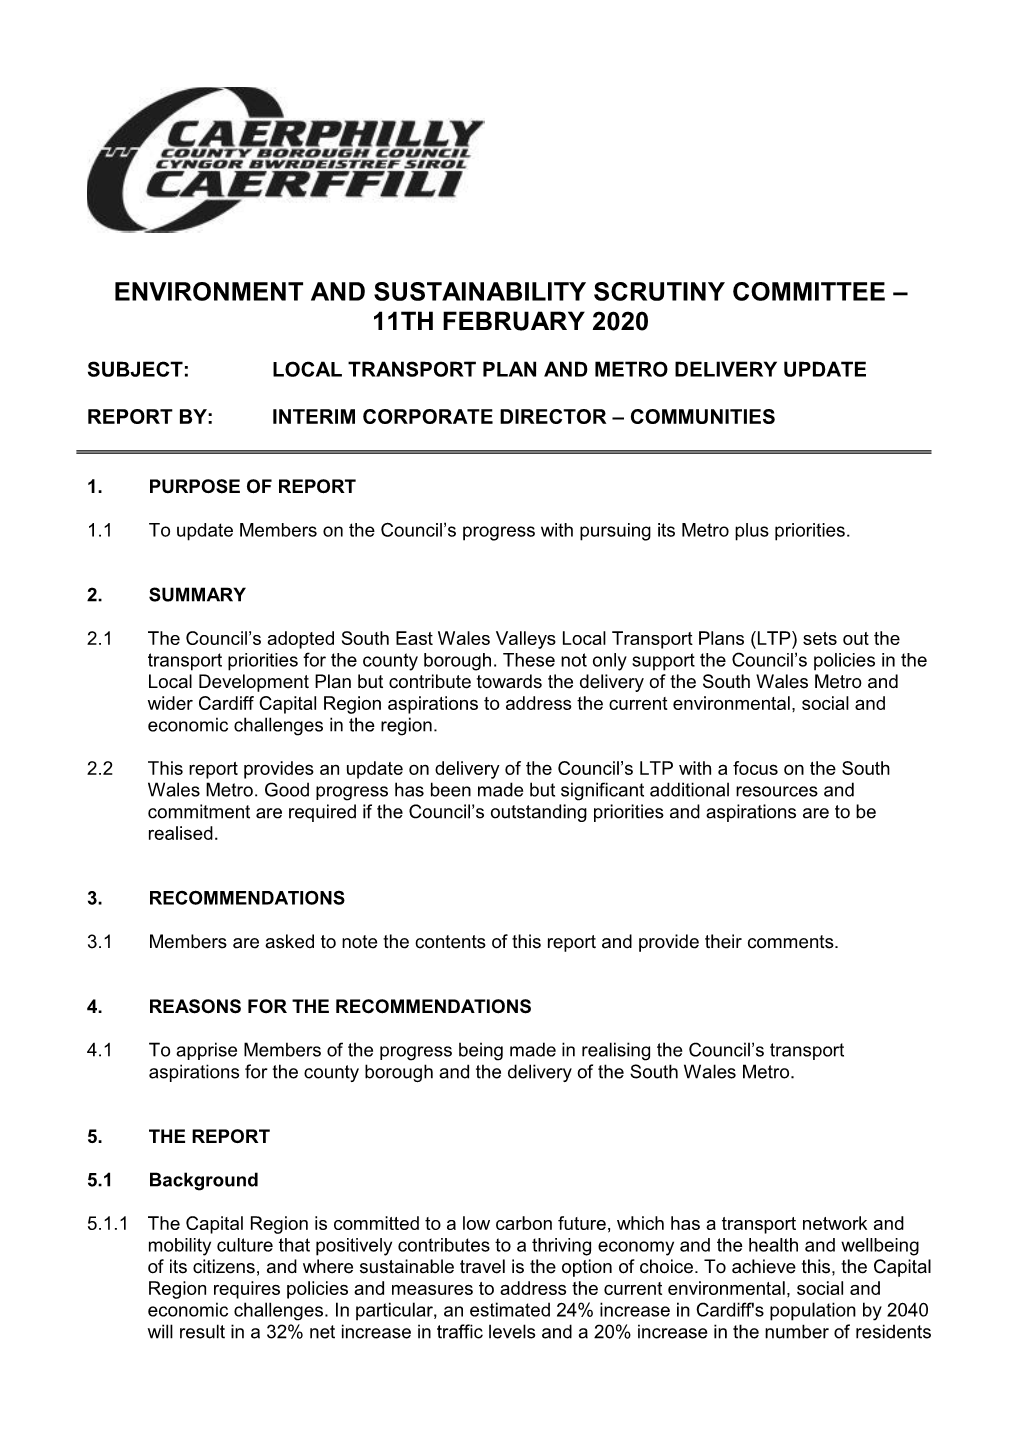 Environment and Sustainability Scrutiny Committee – 11Th February 2020